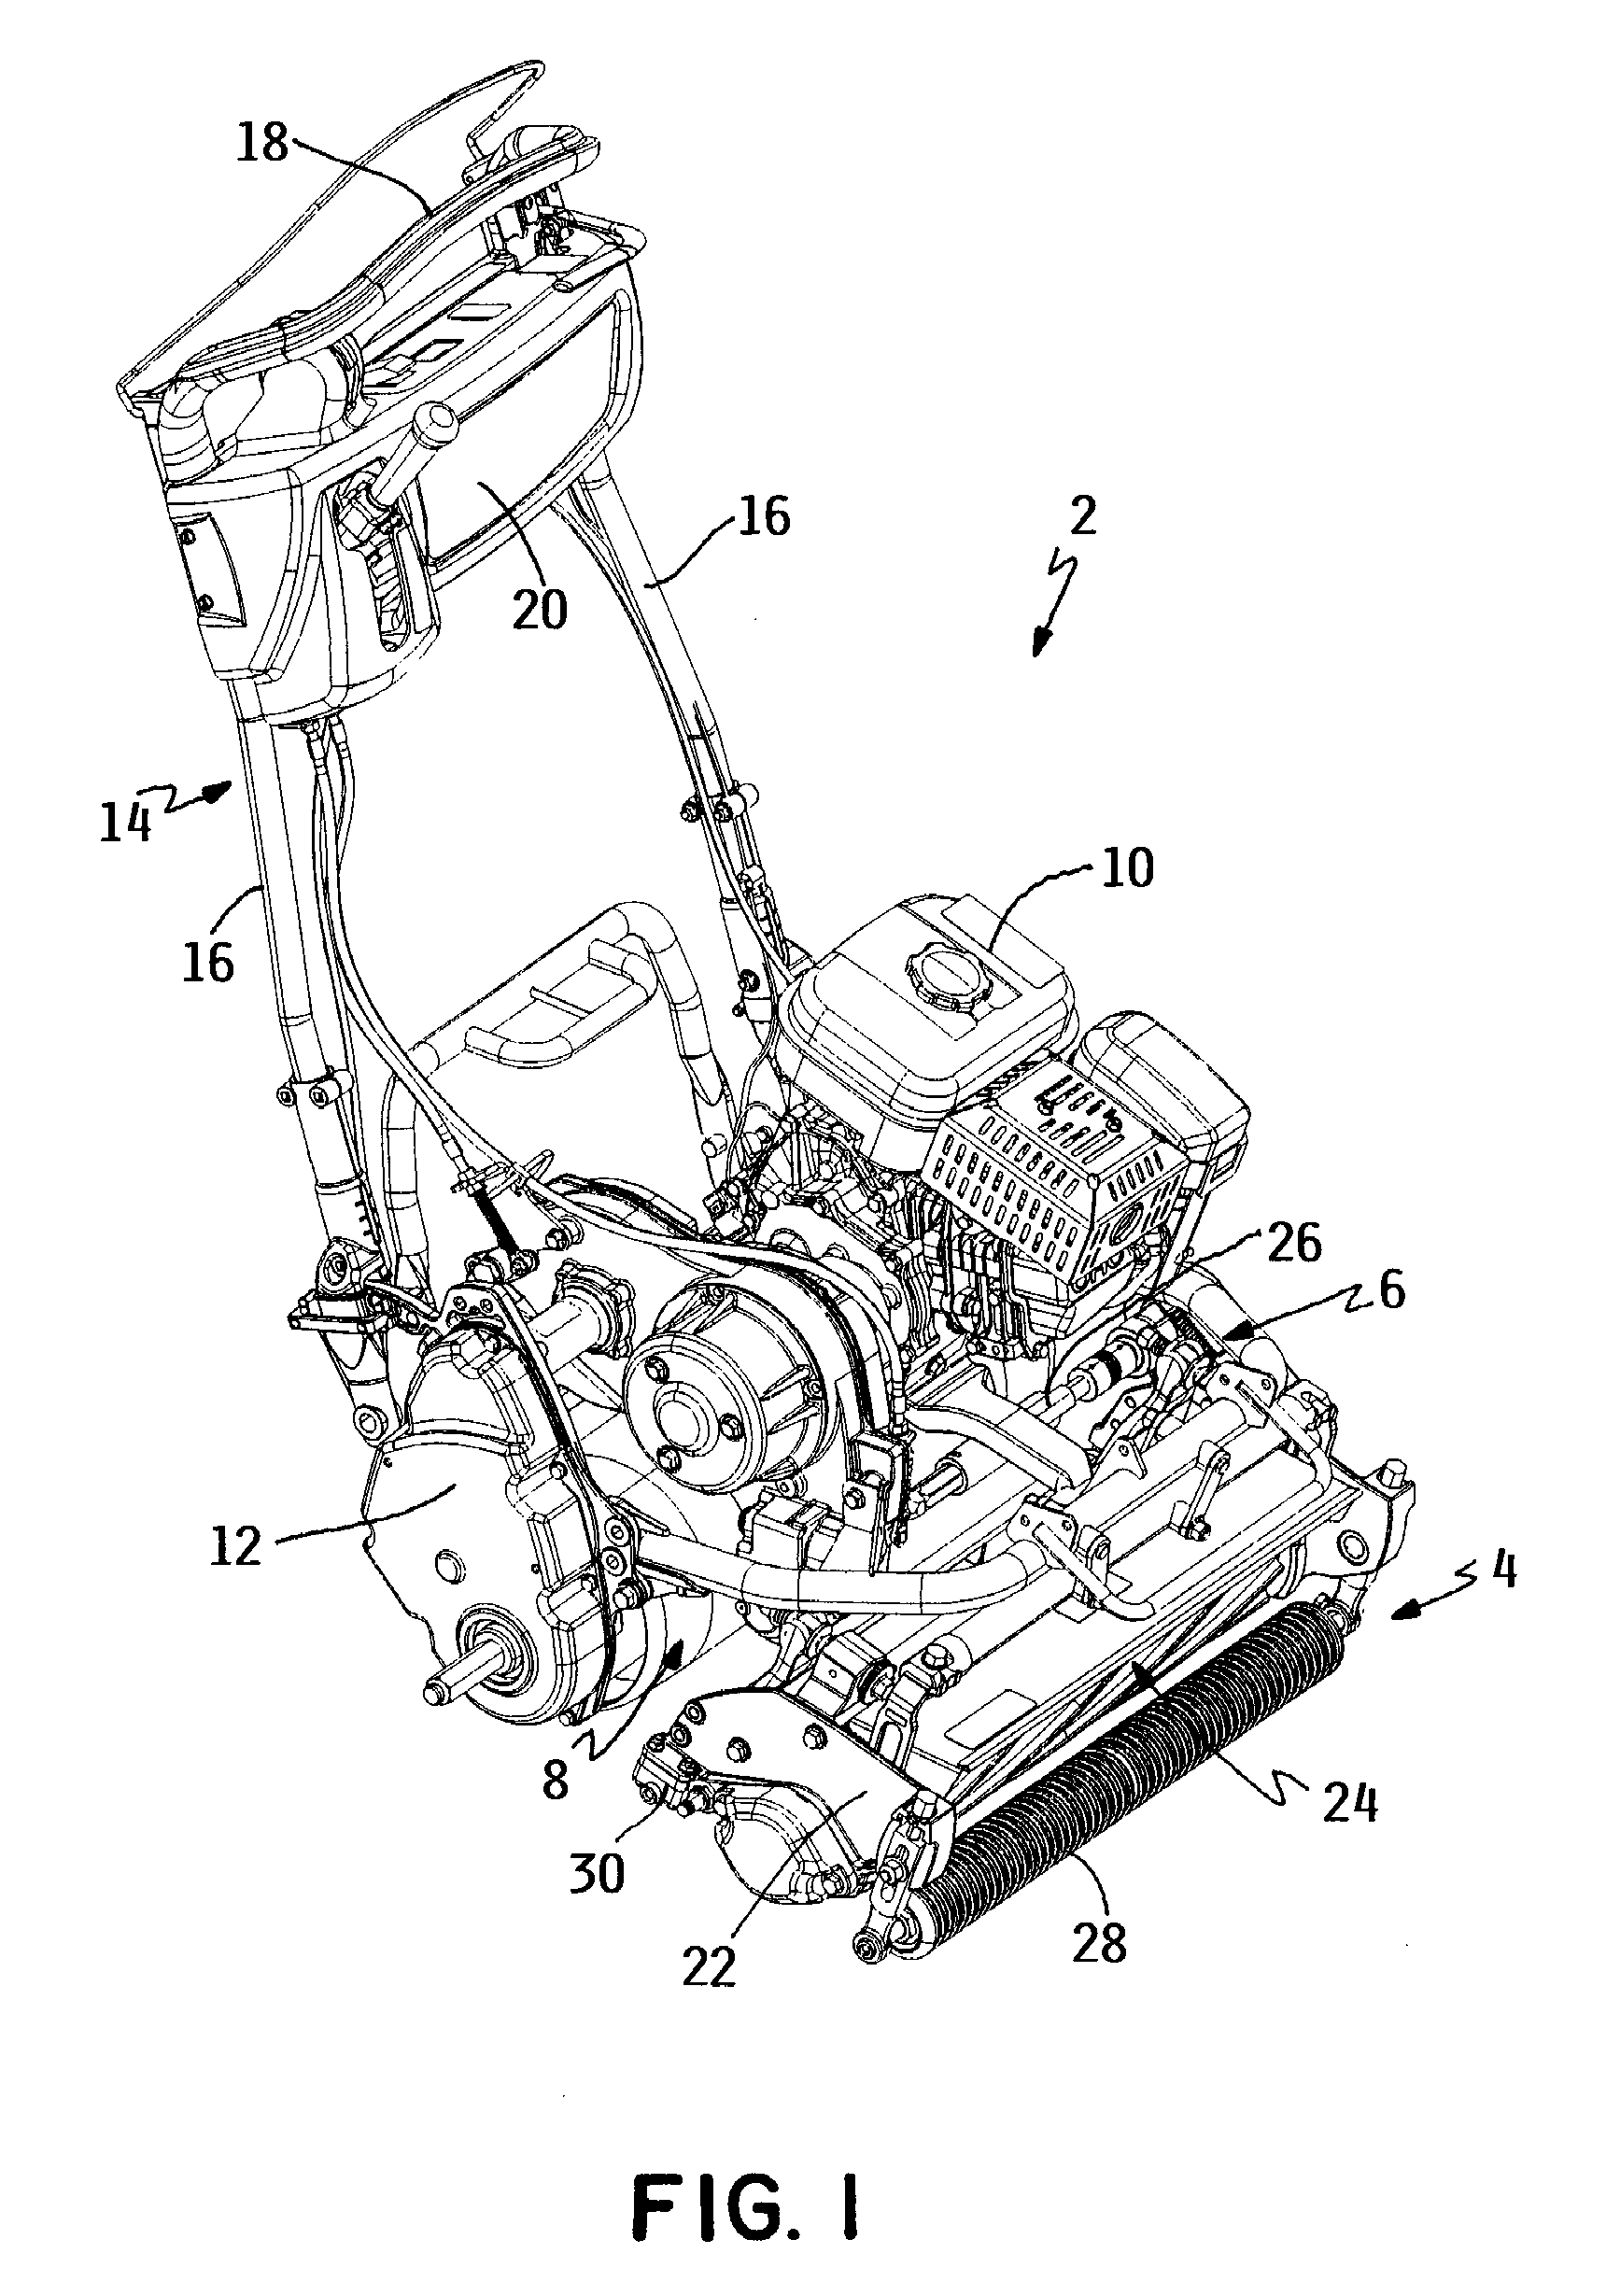 Mower with thumb wheel throttle control